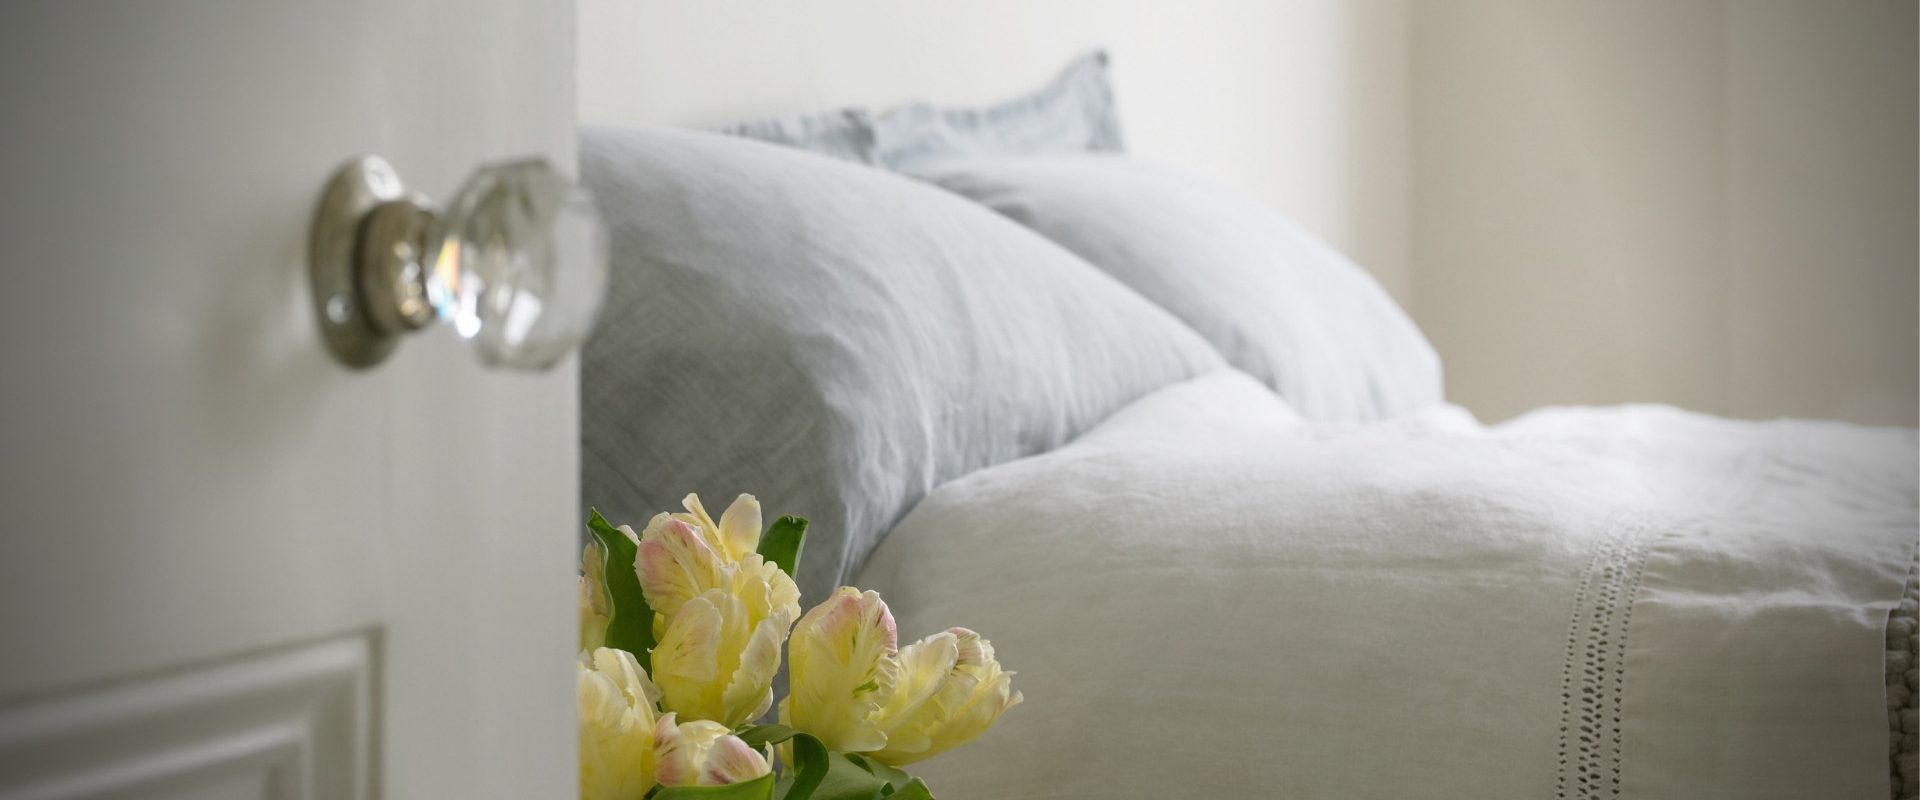 host home bed in white linens and a vase of yellow flowers